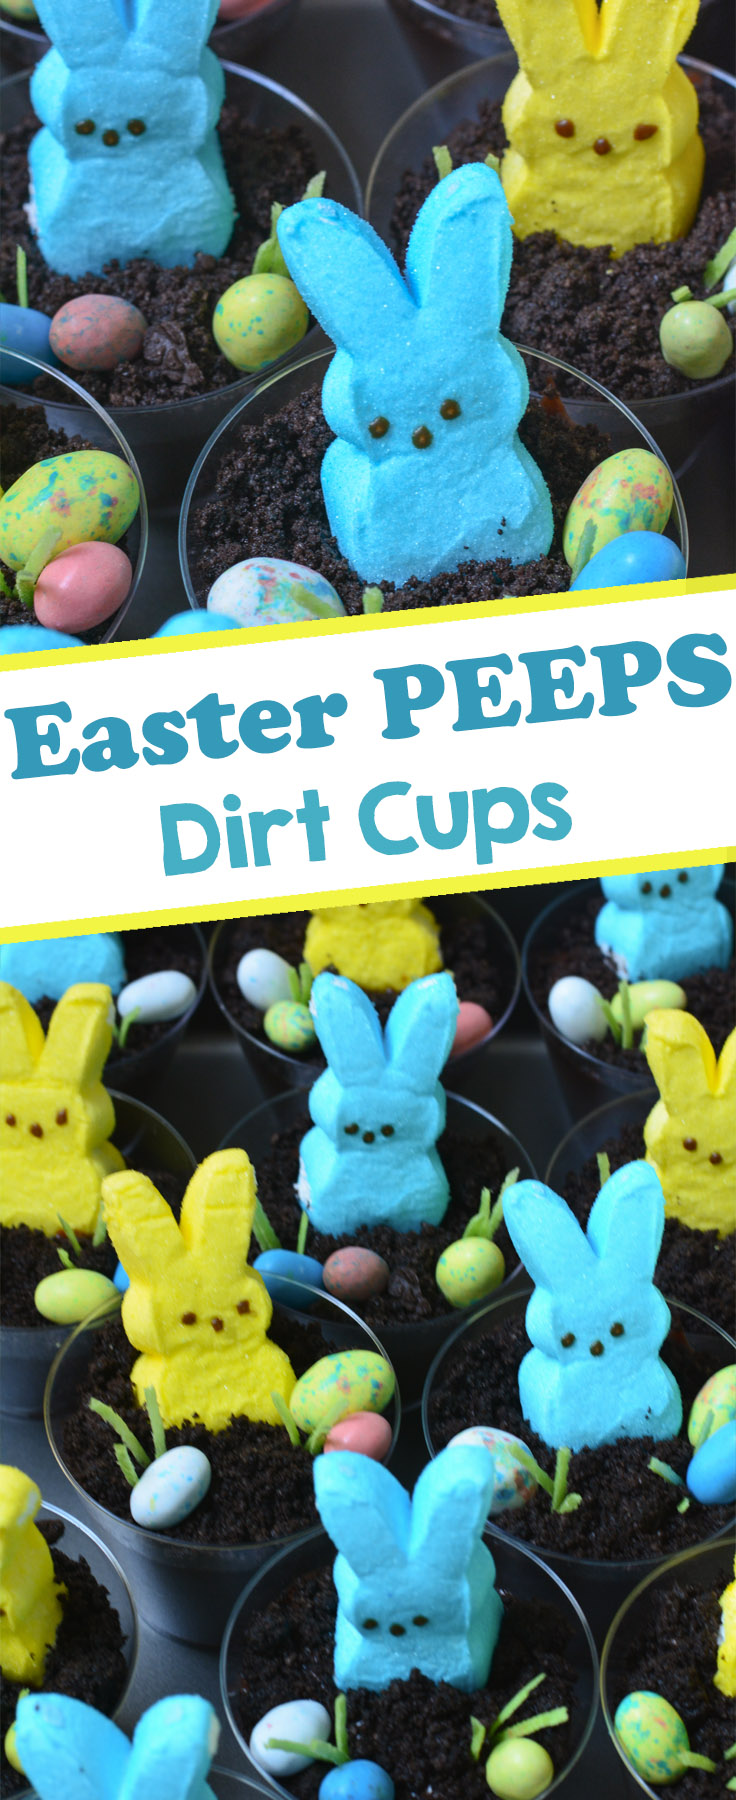 Easter Peeps Dirt Pudding Cups - Diary of A Recipe Collector